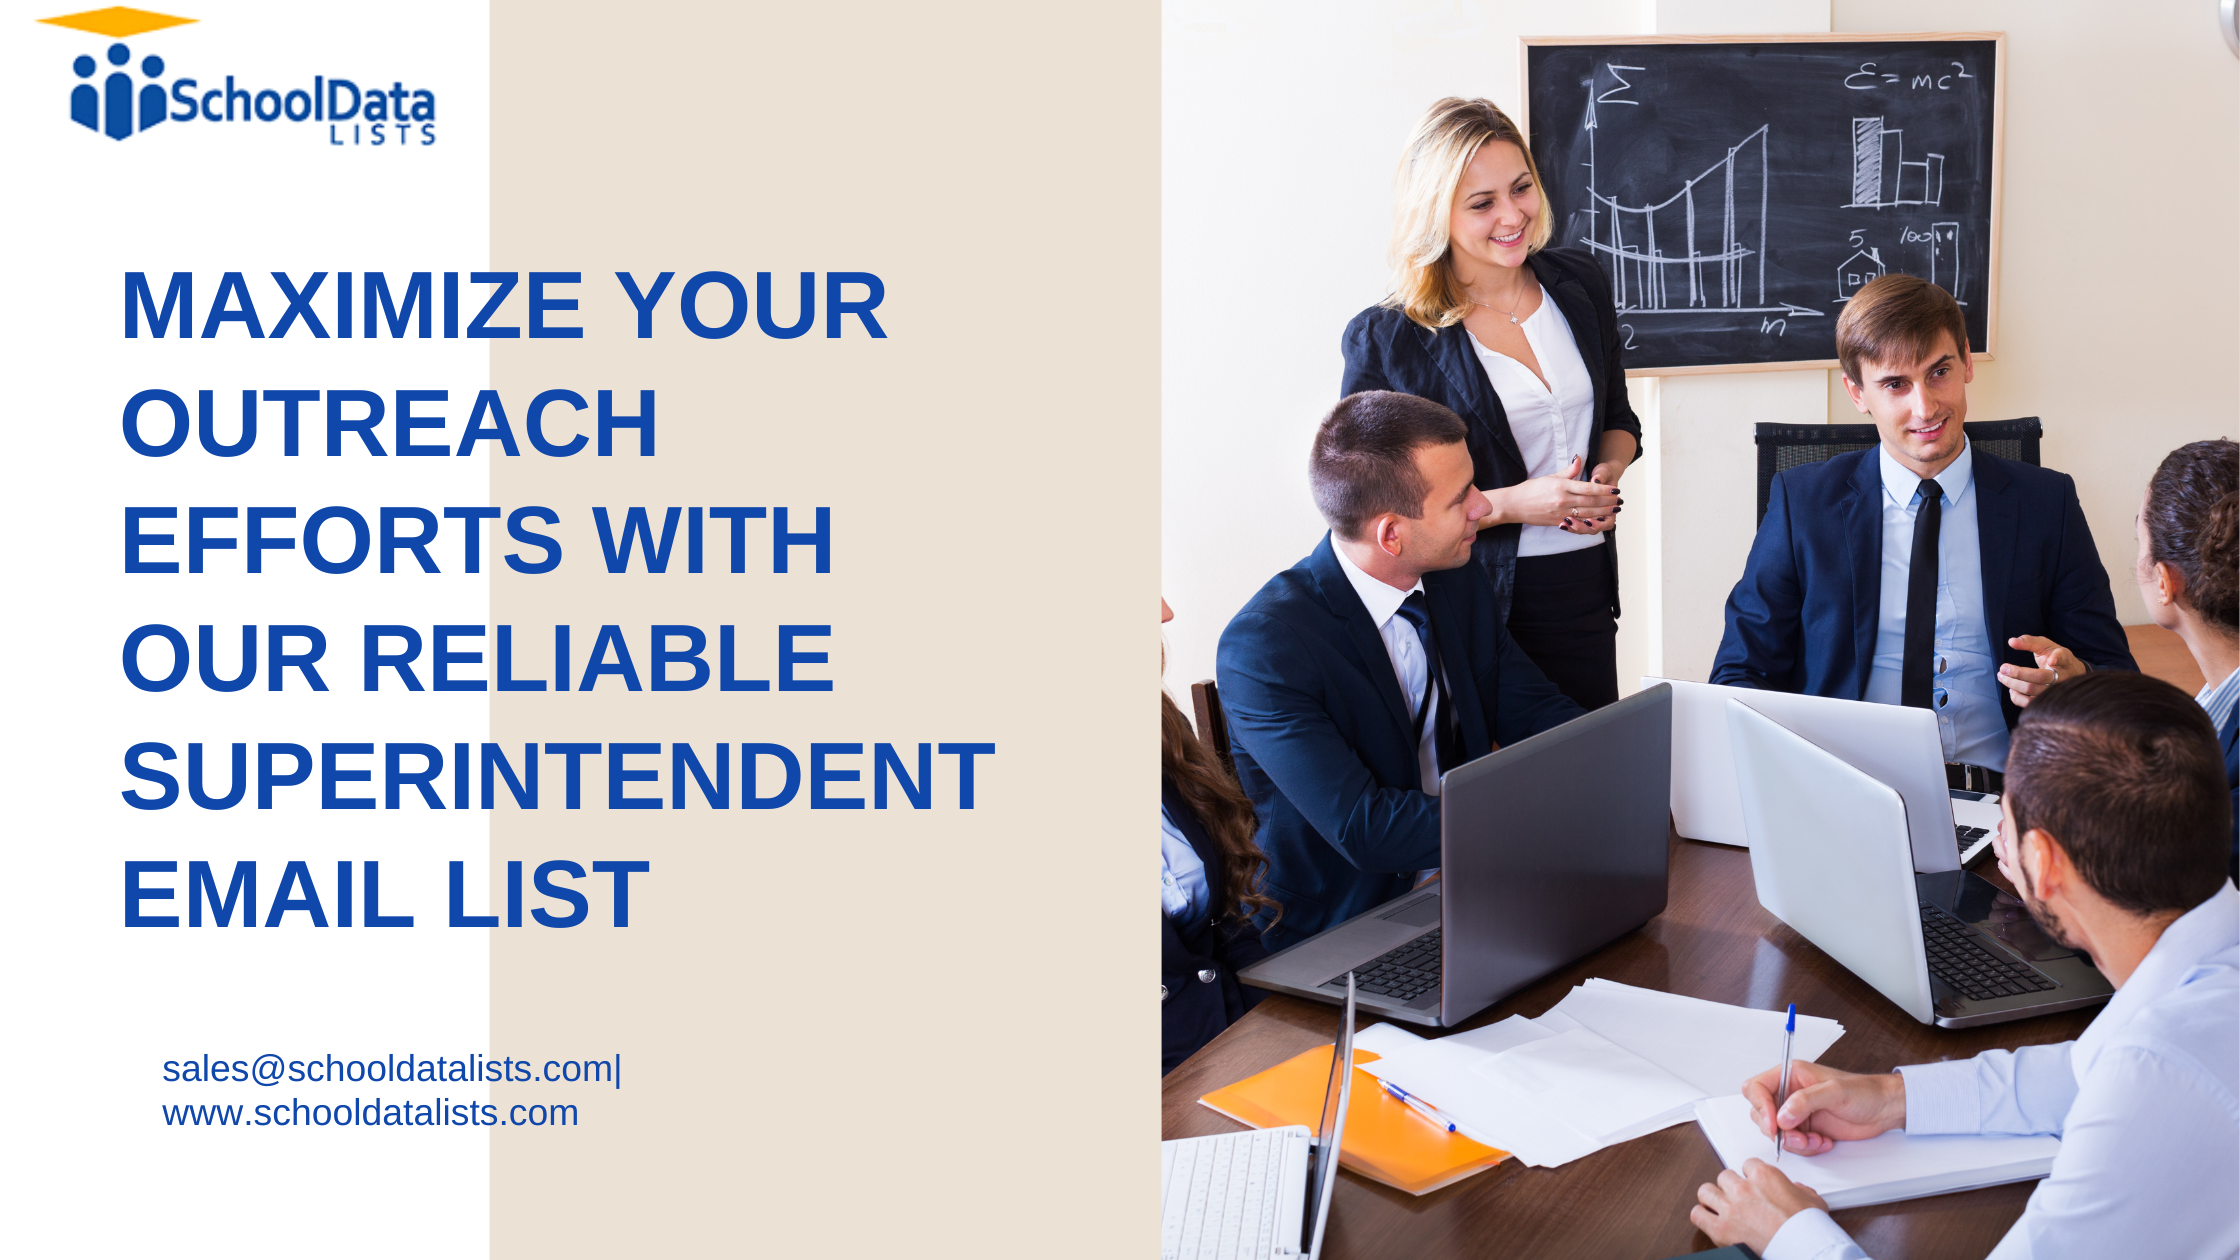 Maximize Your Outreach Efforts with Our Reliable Superintendent Email List